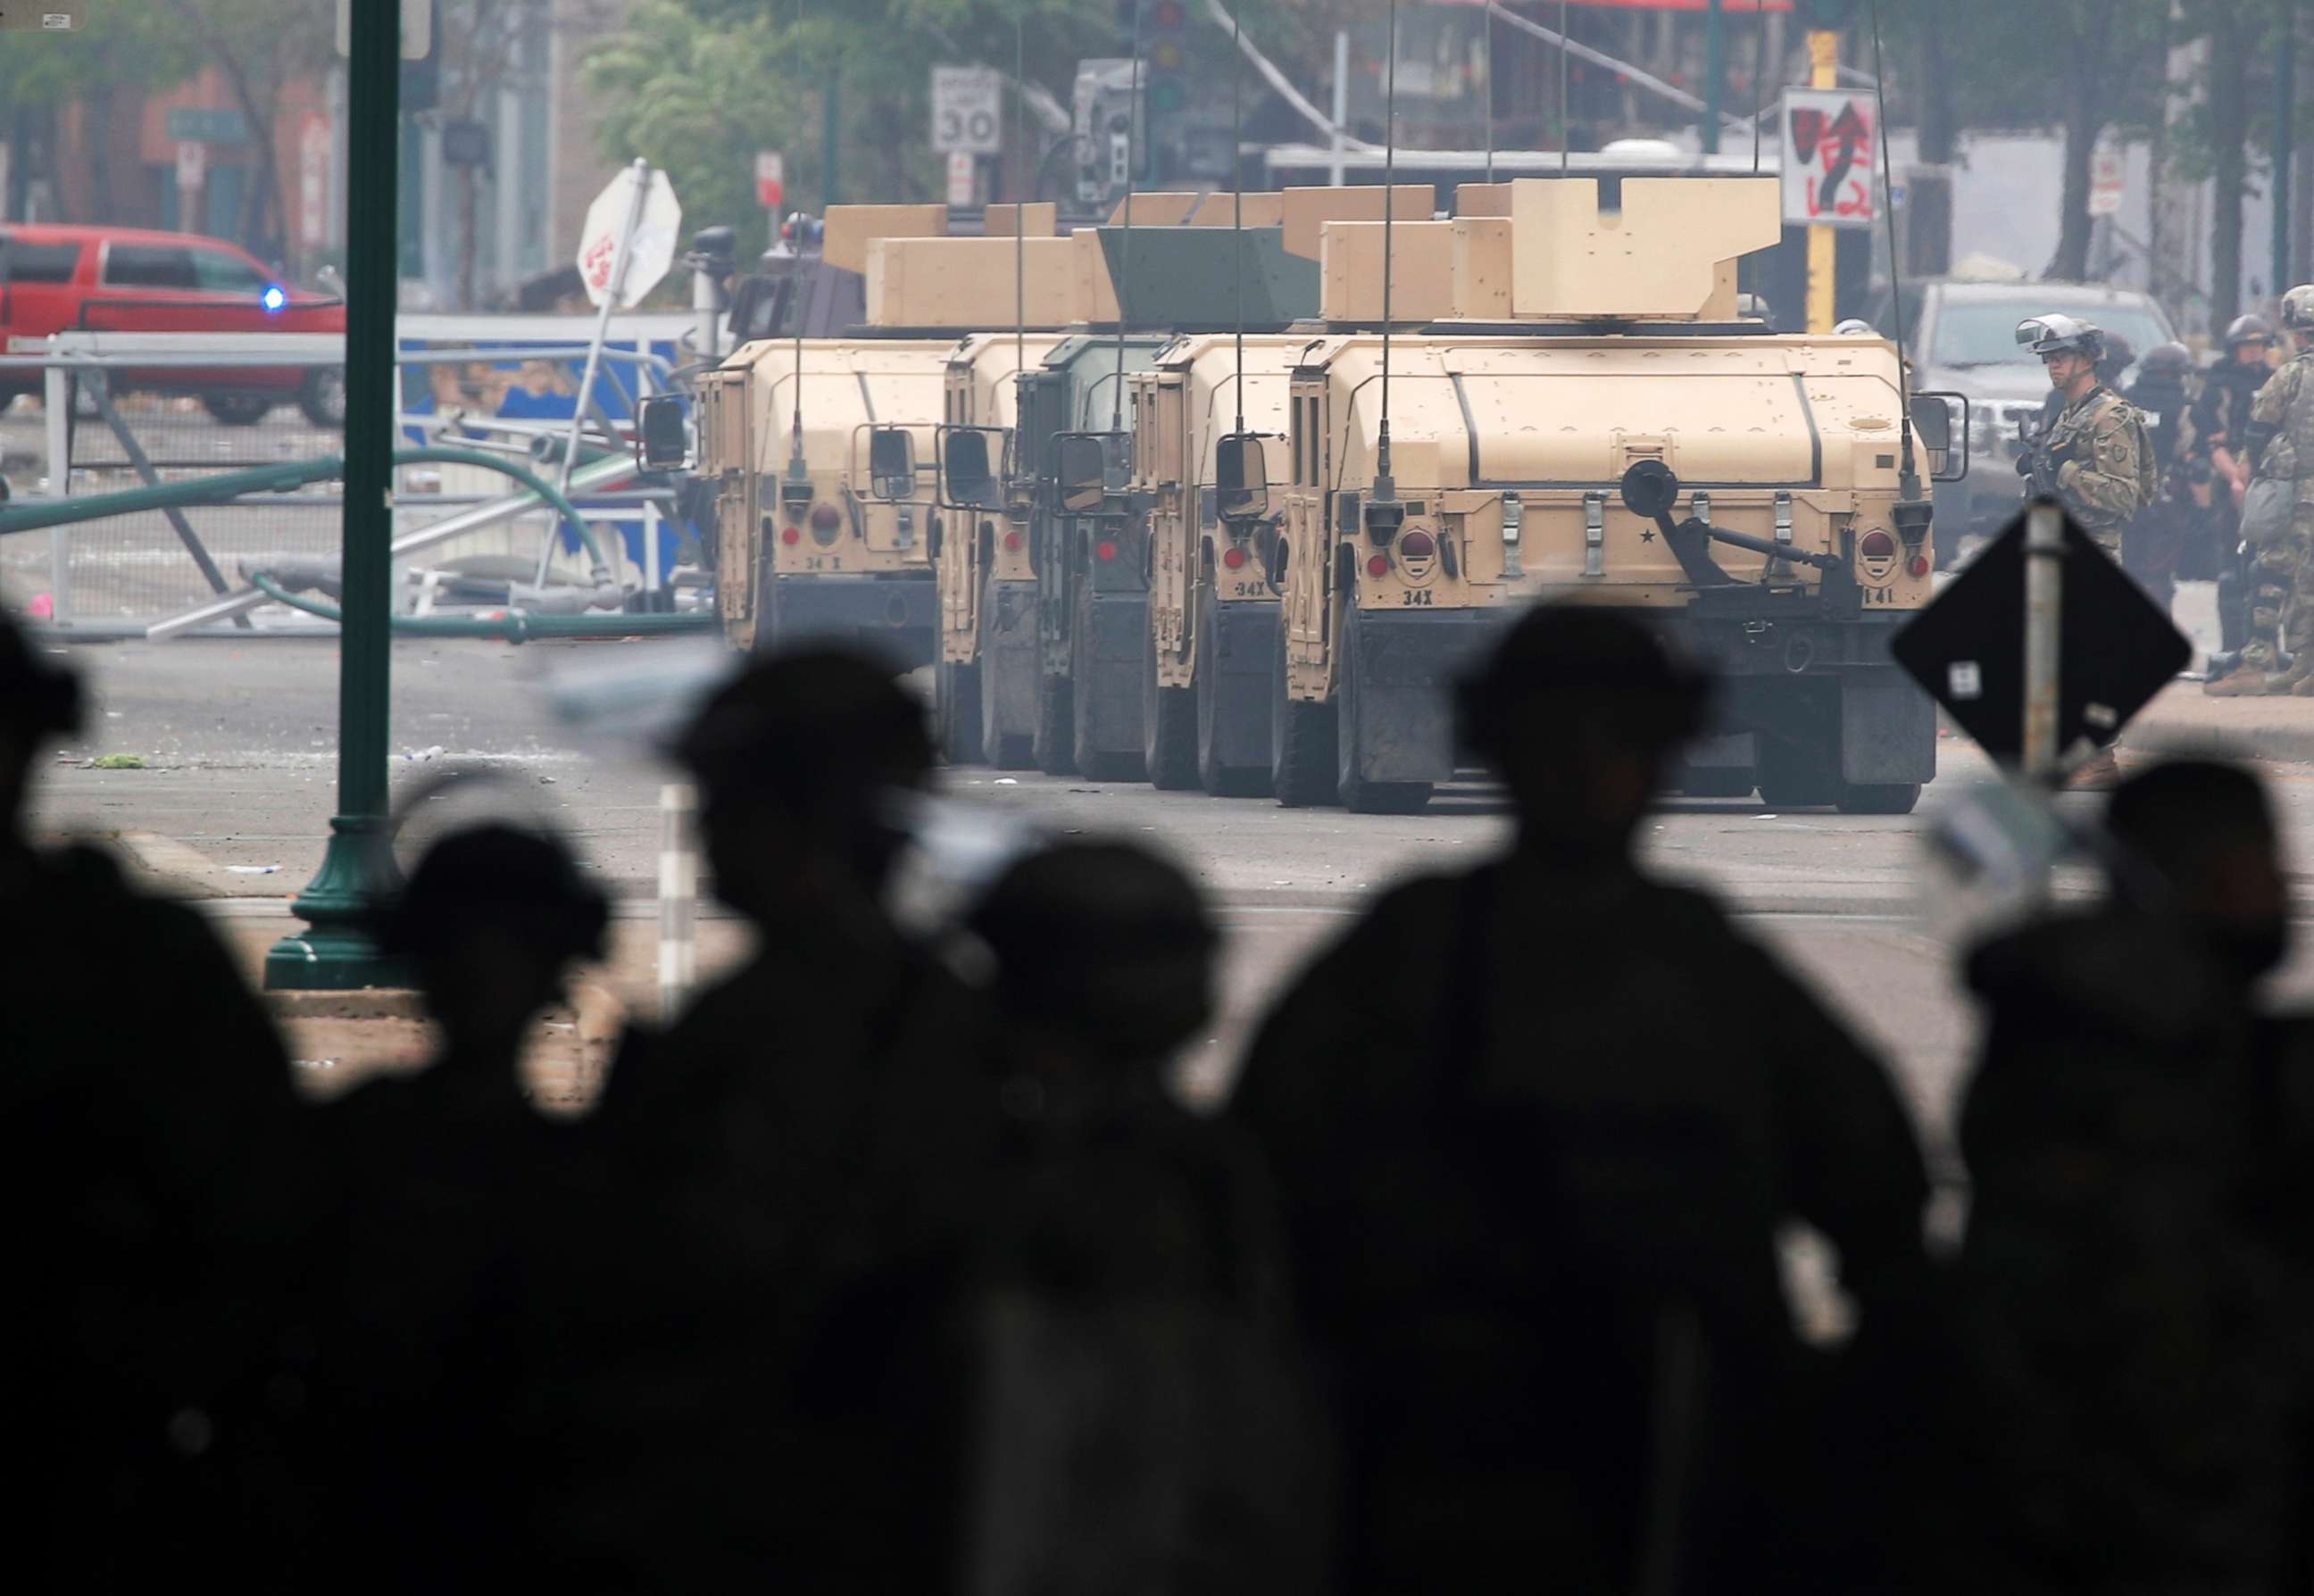 PHOTO: Armored vehicles line the street as National Guard members guard the area in the aftermath the third night of violent protests, May 29, 2020, in Minneapolis, over the death of  George Floyd.